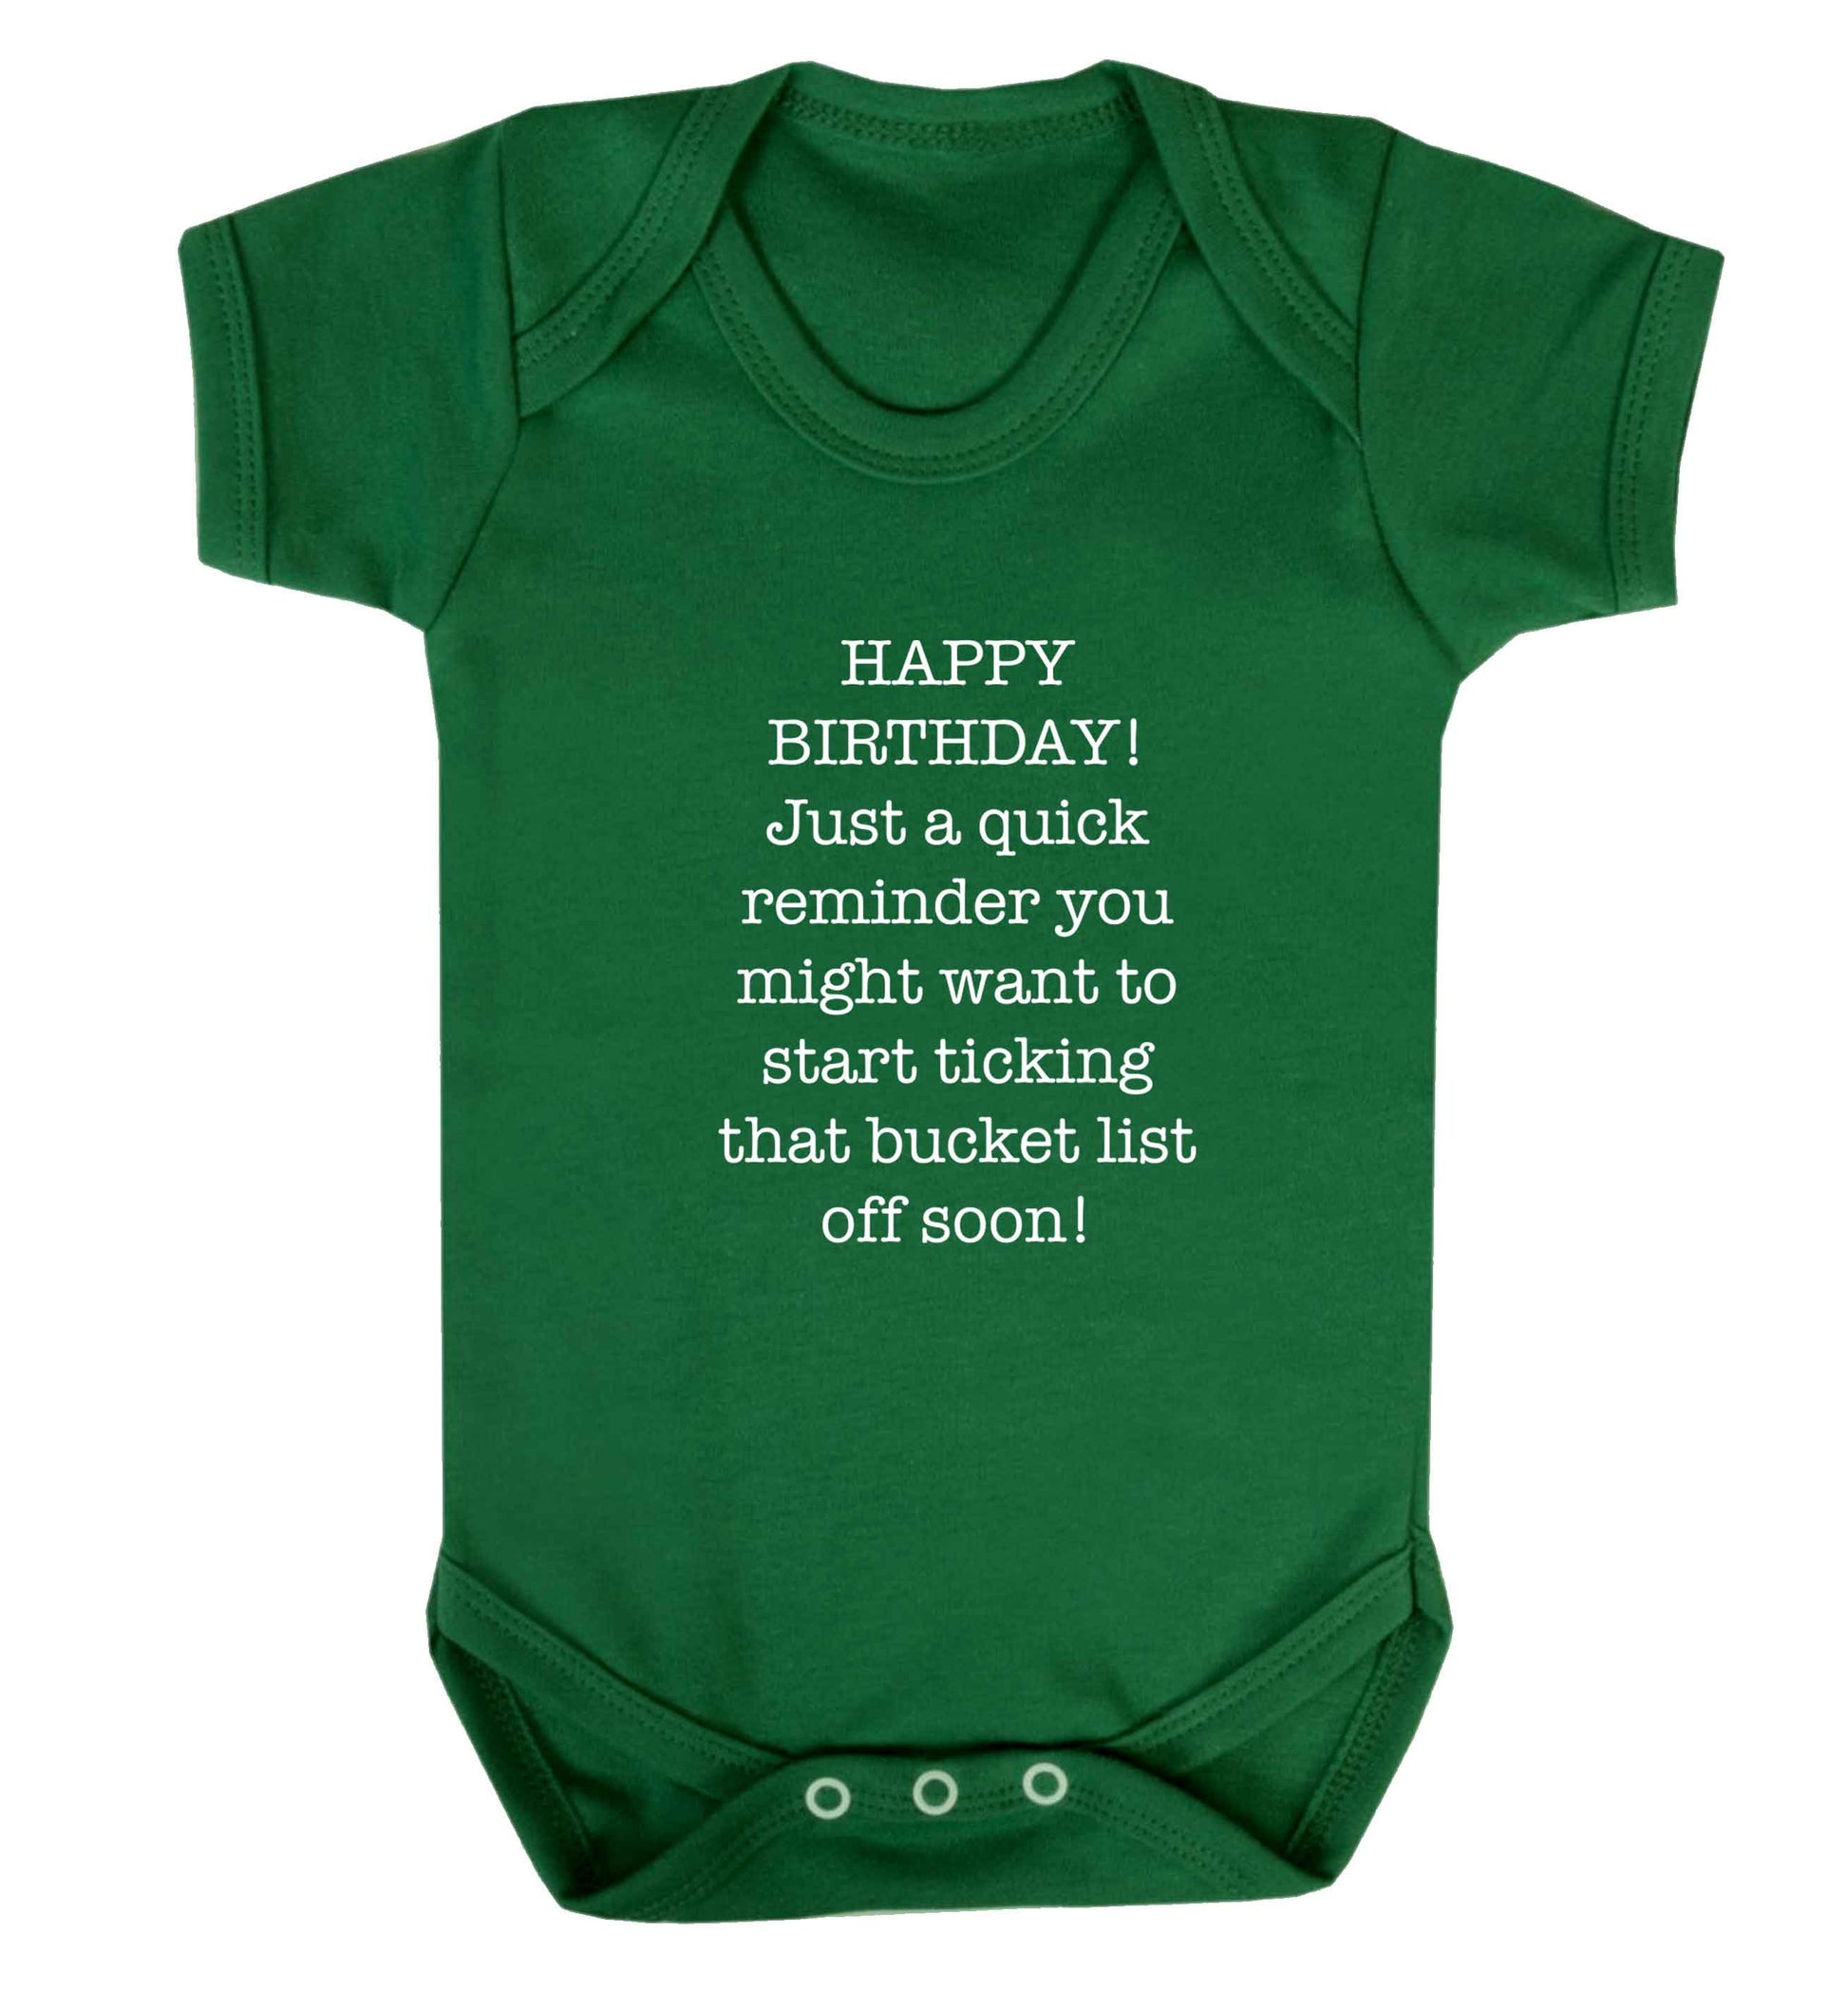 Happy birthday, just a quick reminder you might want to start ticking that bucket list off soon baby vest green 18-24 months